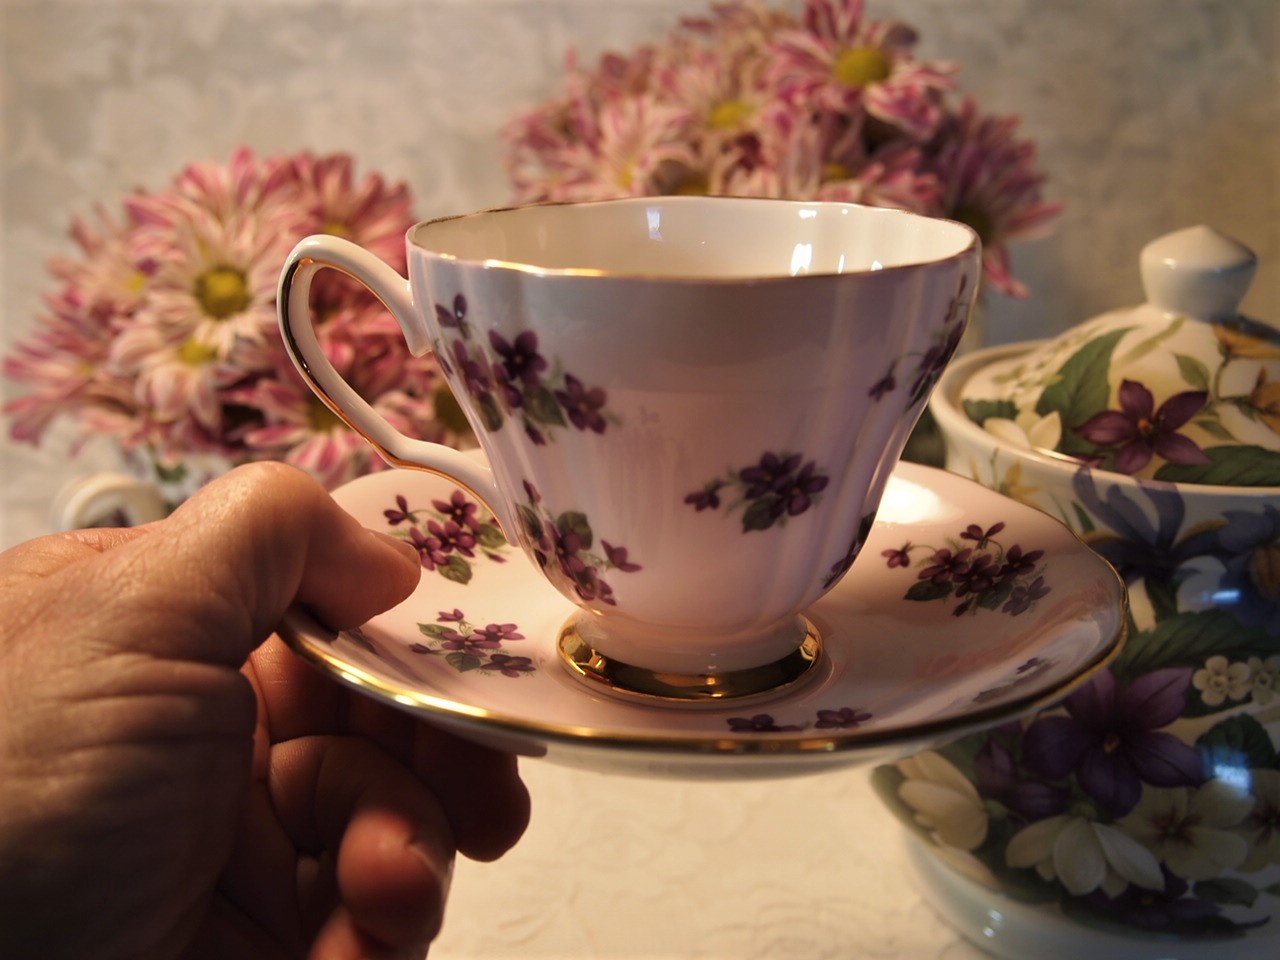 How to serve tea - holding the cup and saucer